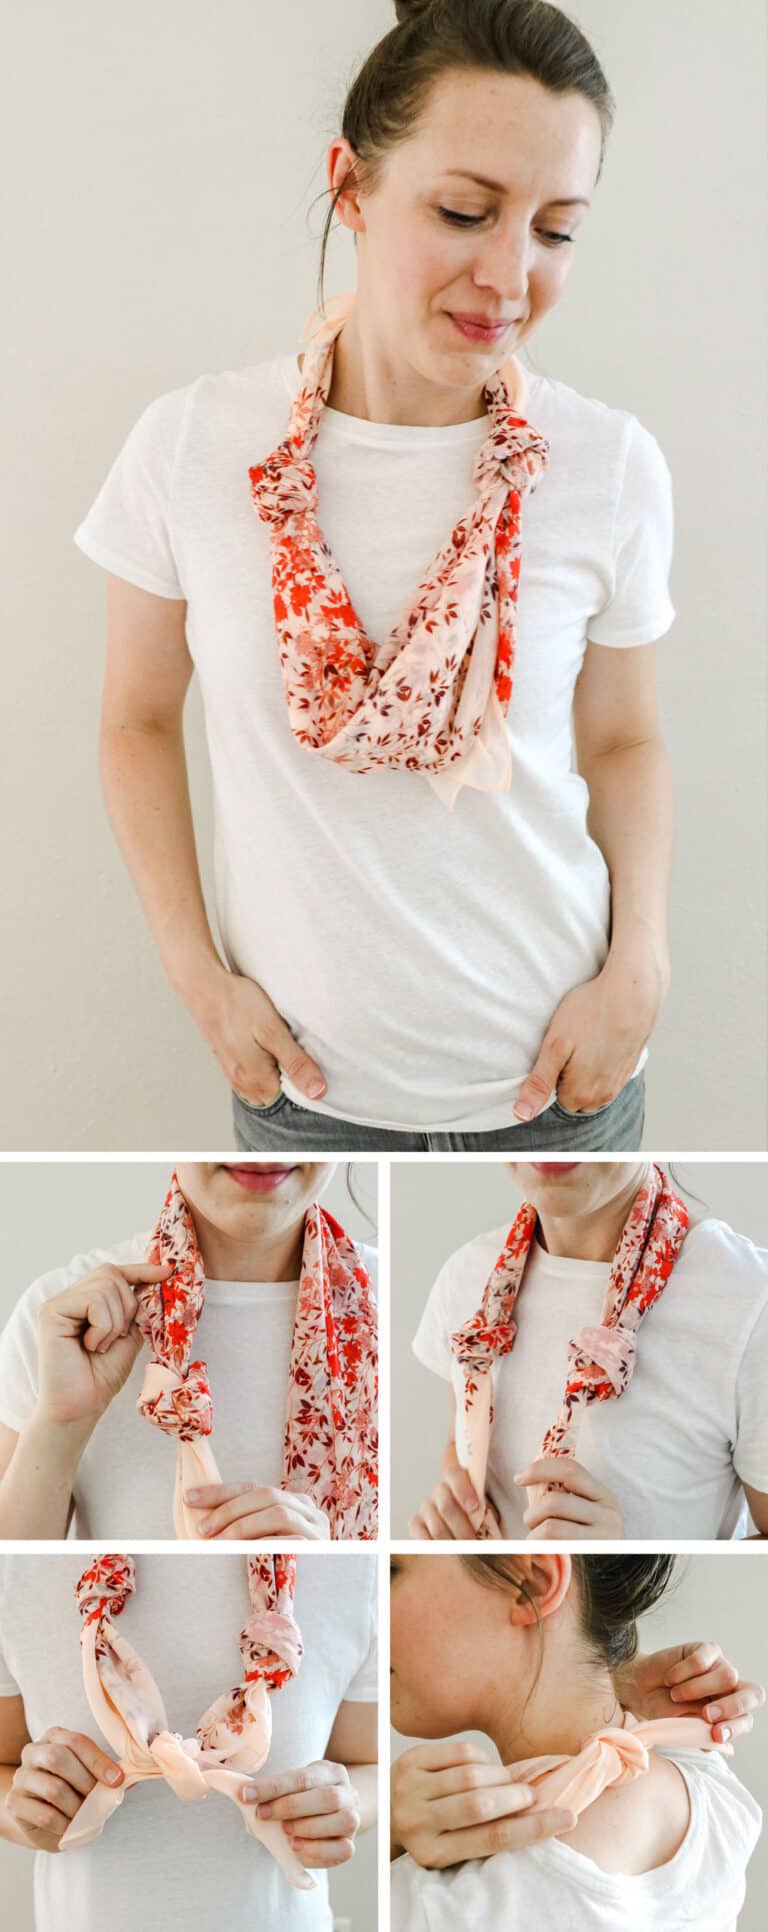 19 Super Stylish Ways to Tie a Scarf | Different Ways of Tying a Scarf